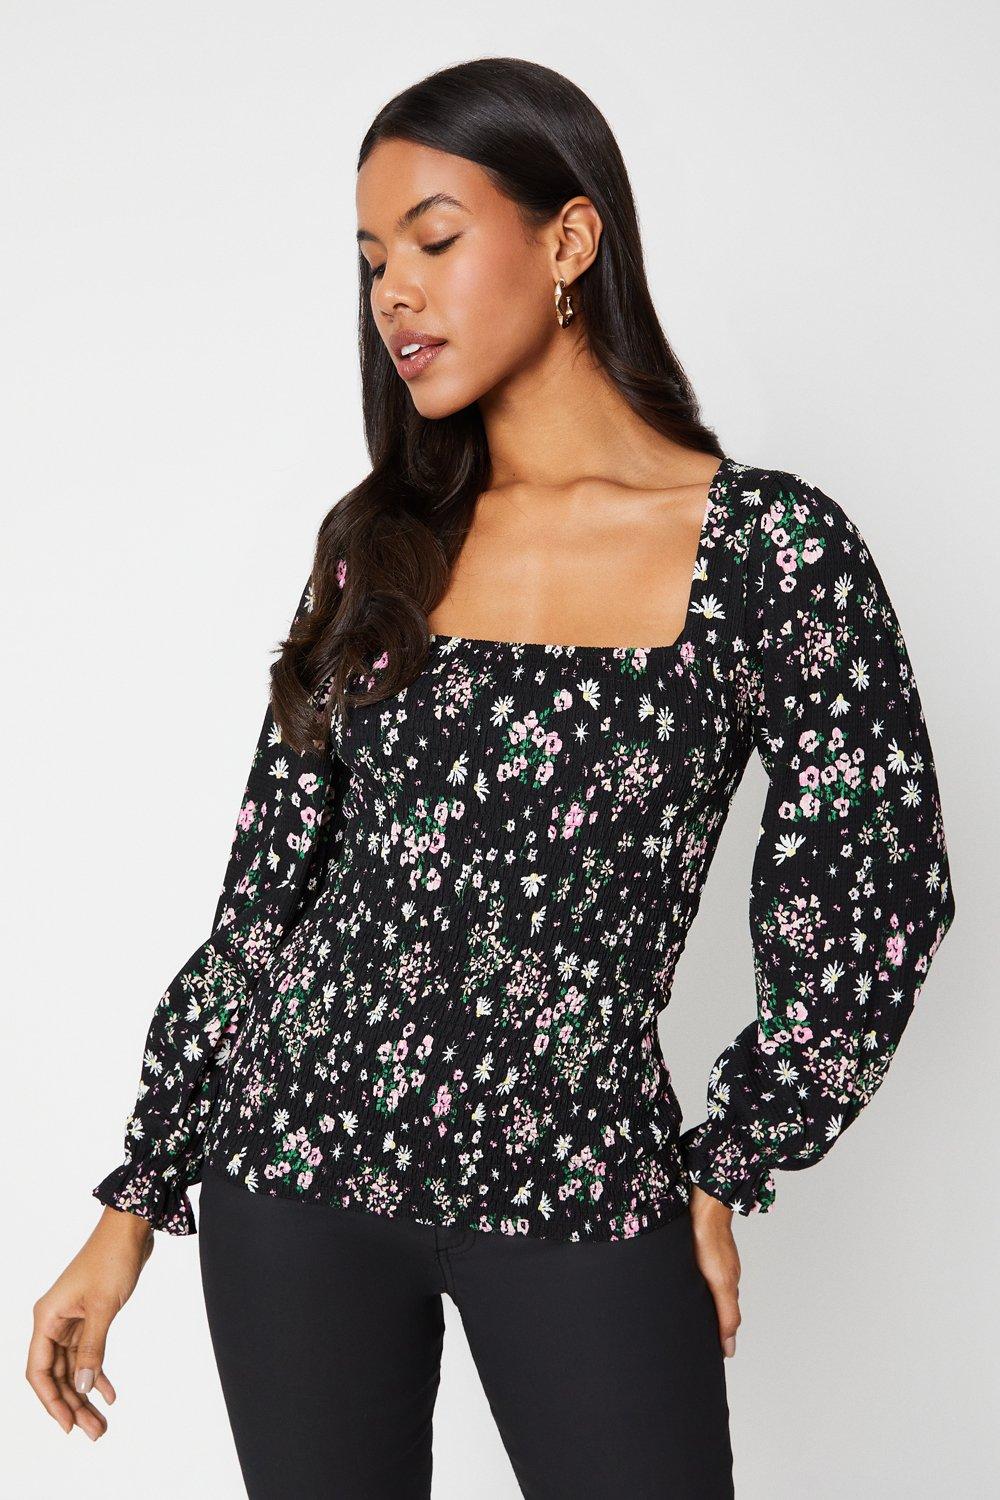 Women’s Floral Square Neck Long Sleeve Top - M